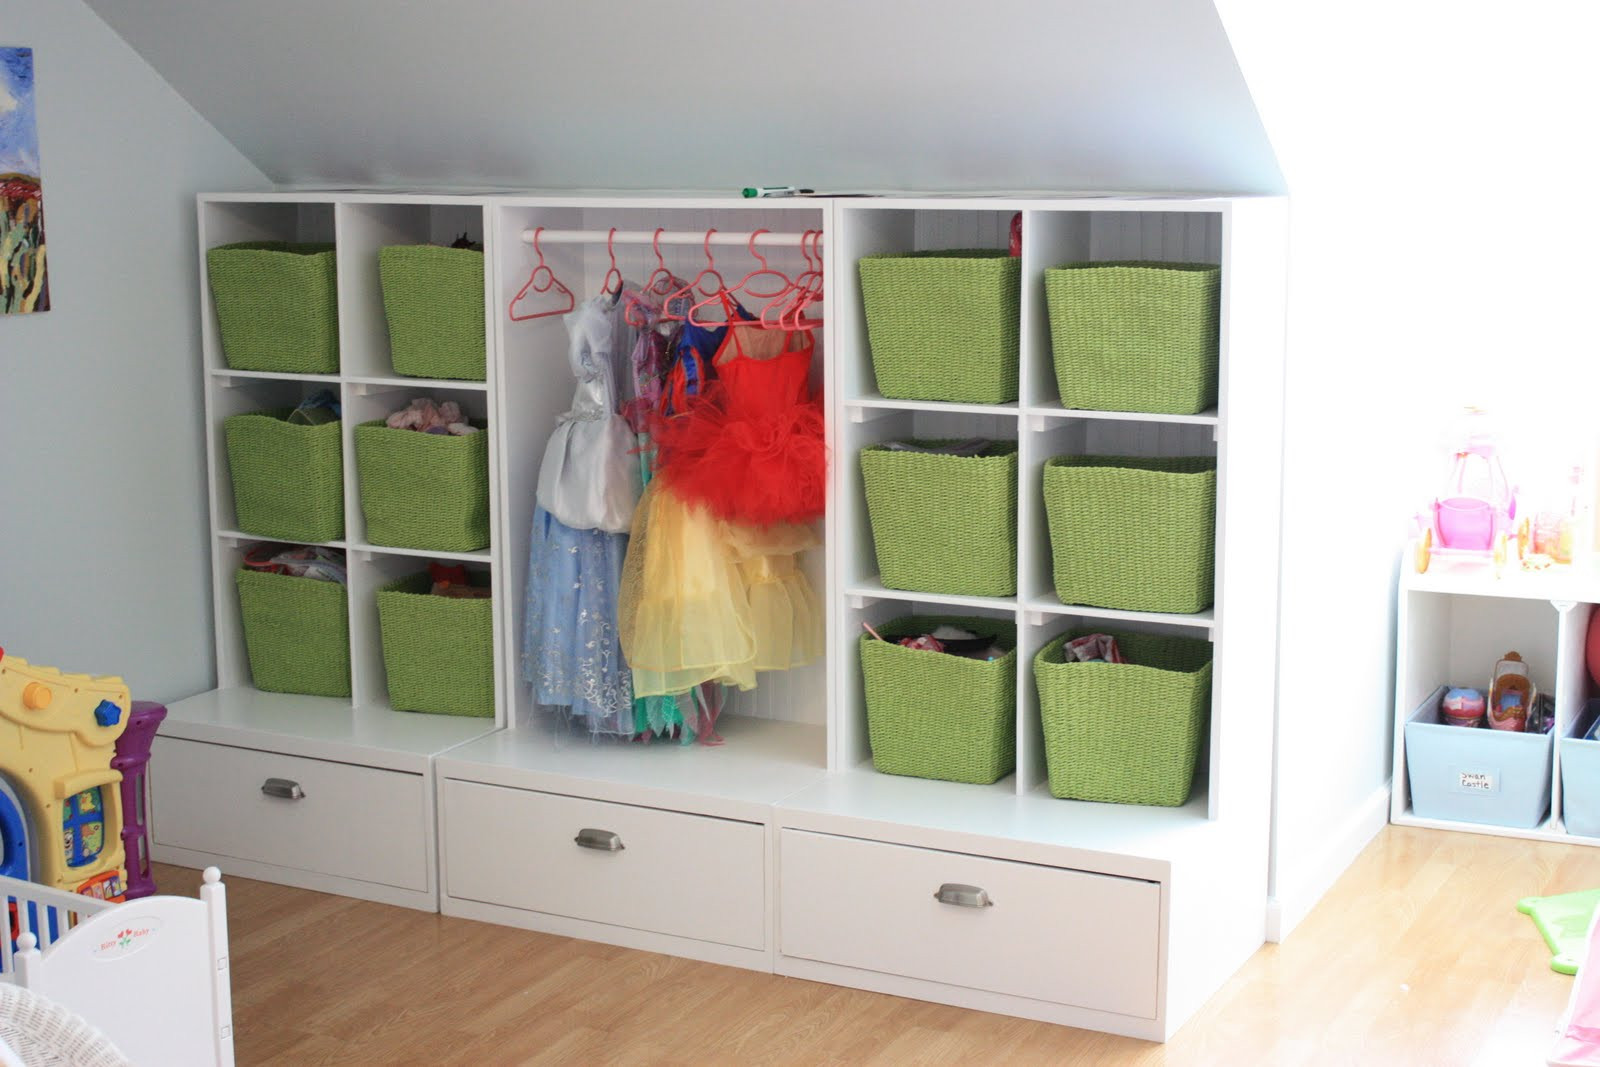 Storage For Kids Room
 Trey and Abby My Playroom Storage Solution